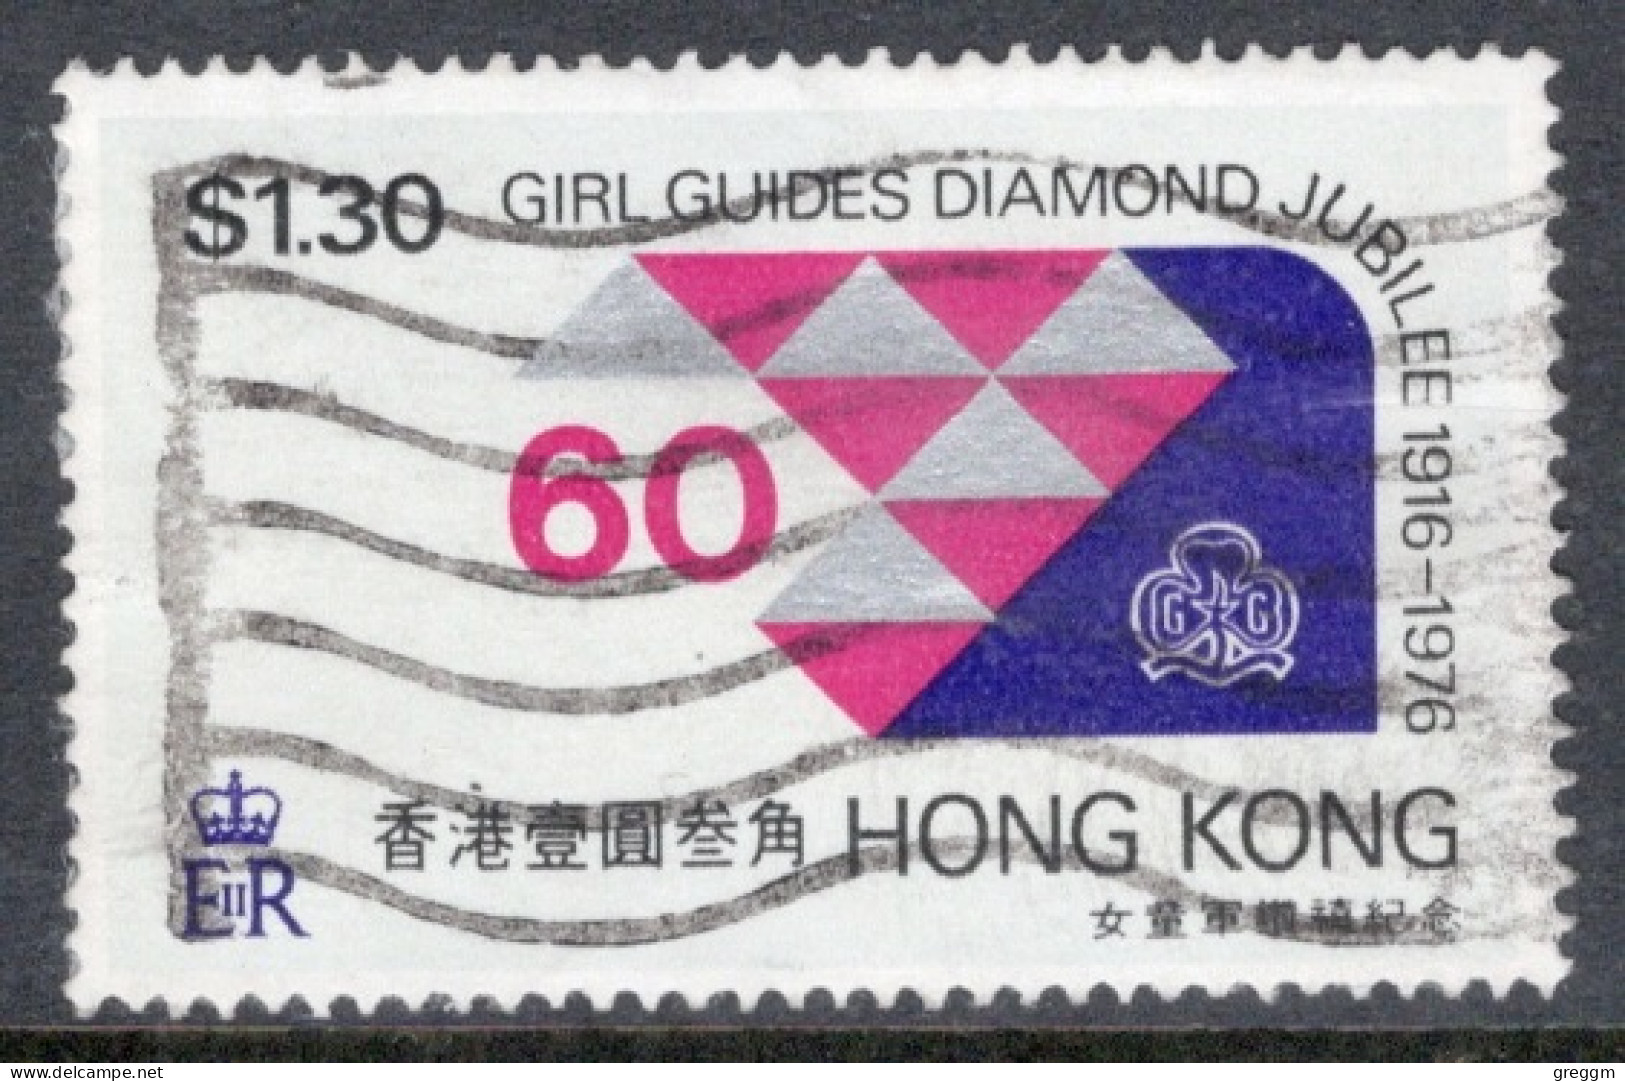 Hong Kong 1976 A Single Stamp To Celebrate The 60th Anniversary Of Girl Guides In Fine Used - Usati